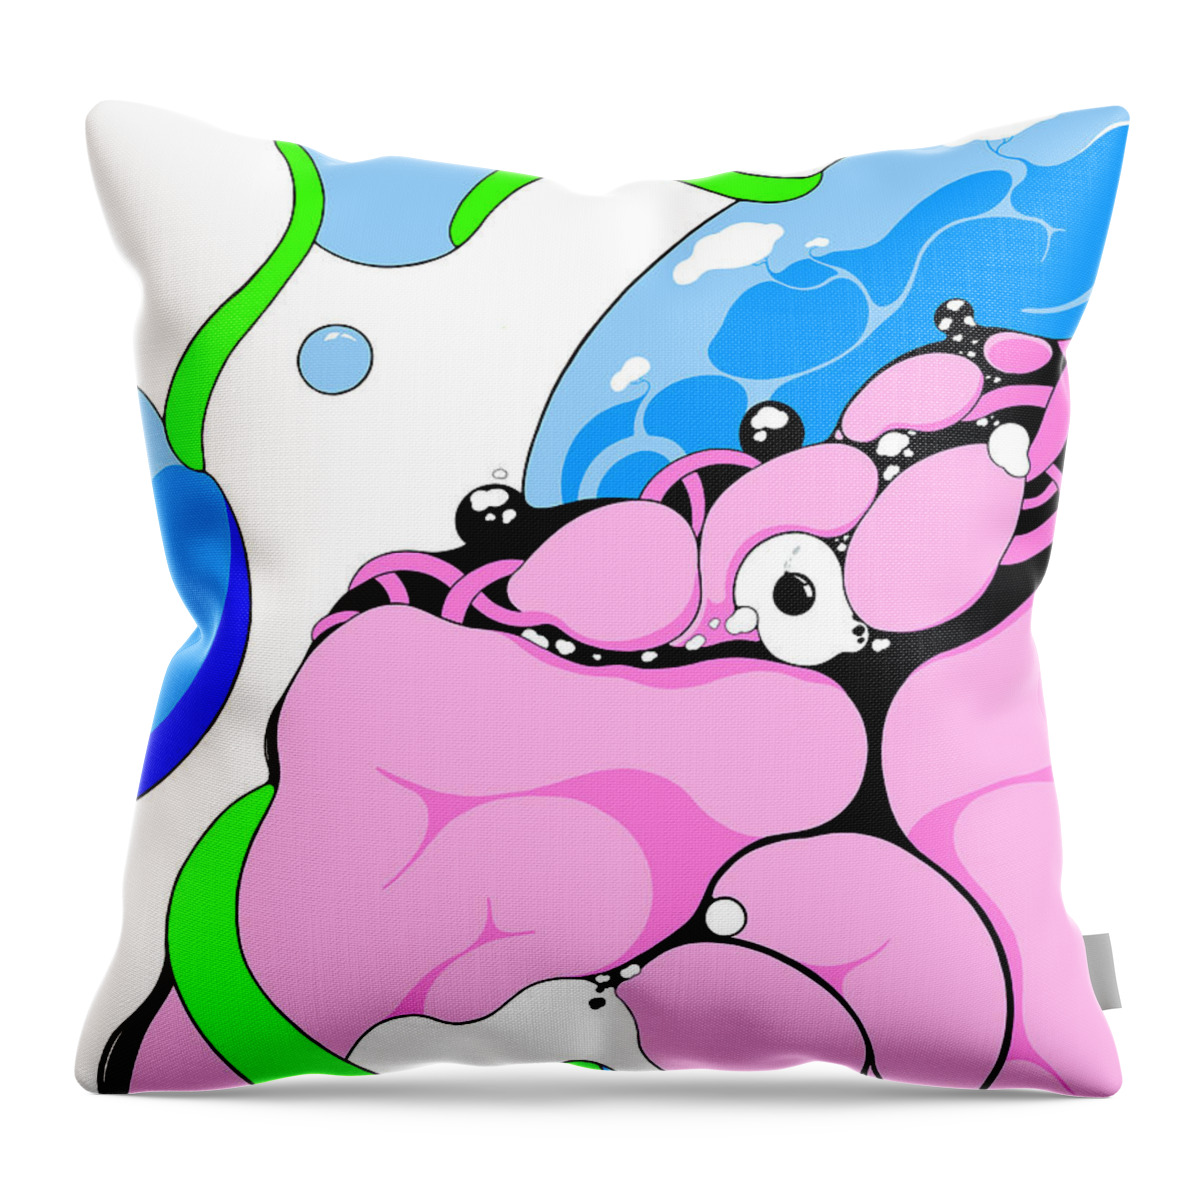 Elephant Throw Pillow featuring the digital art Thought Bubble by Craig Tilley